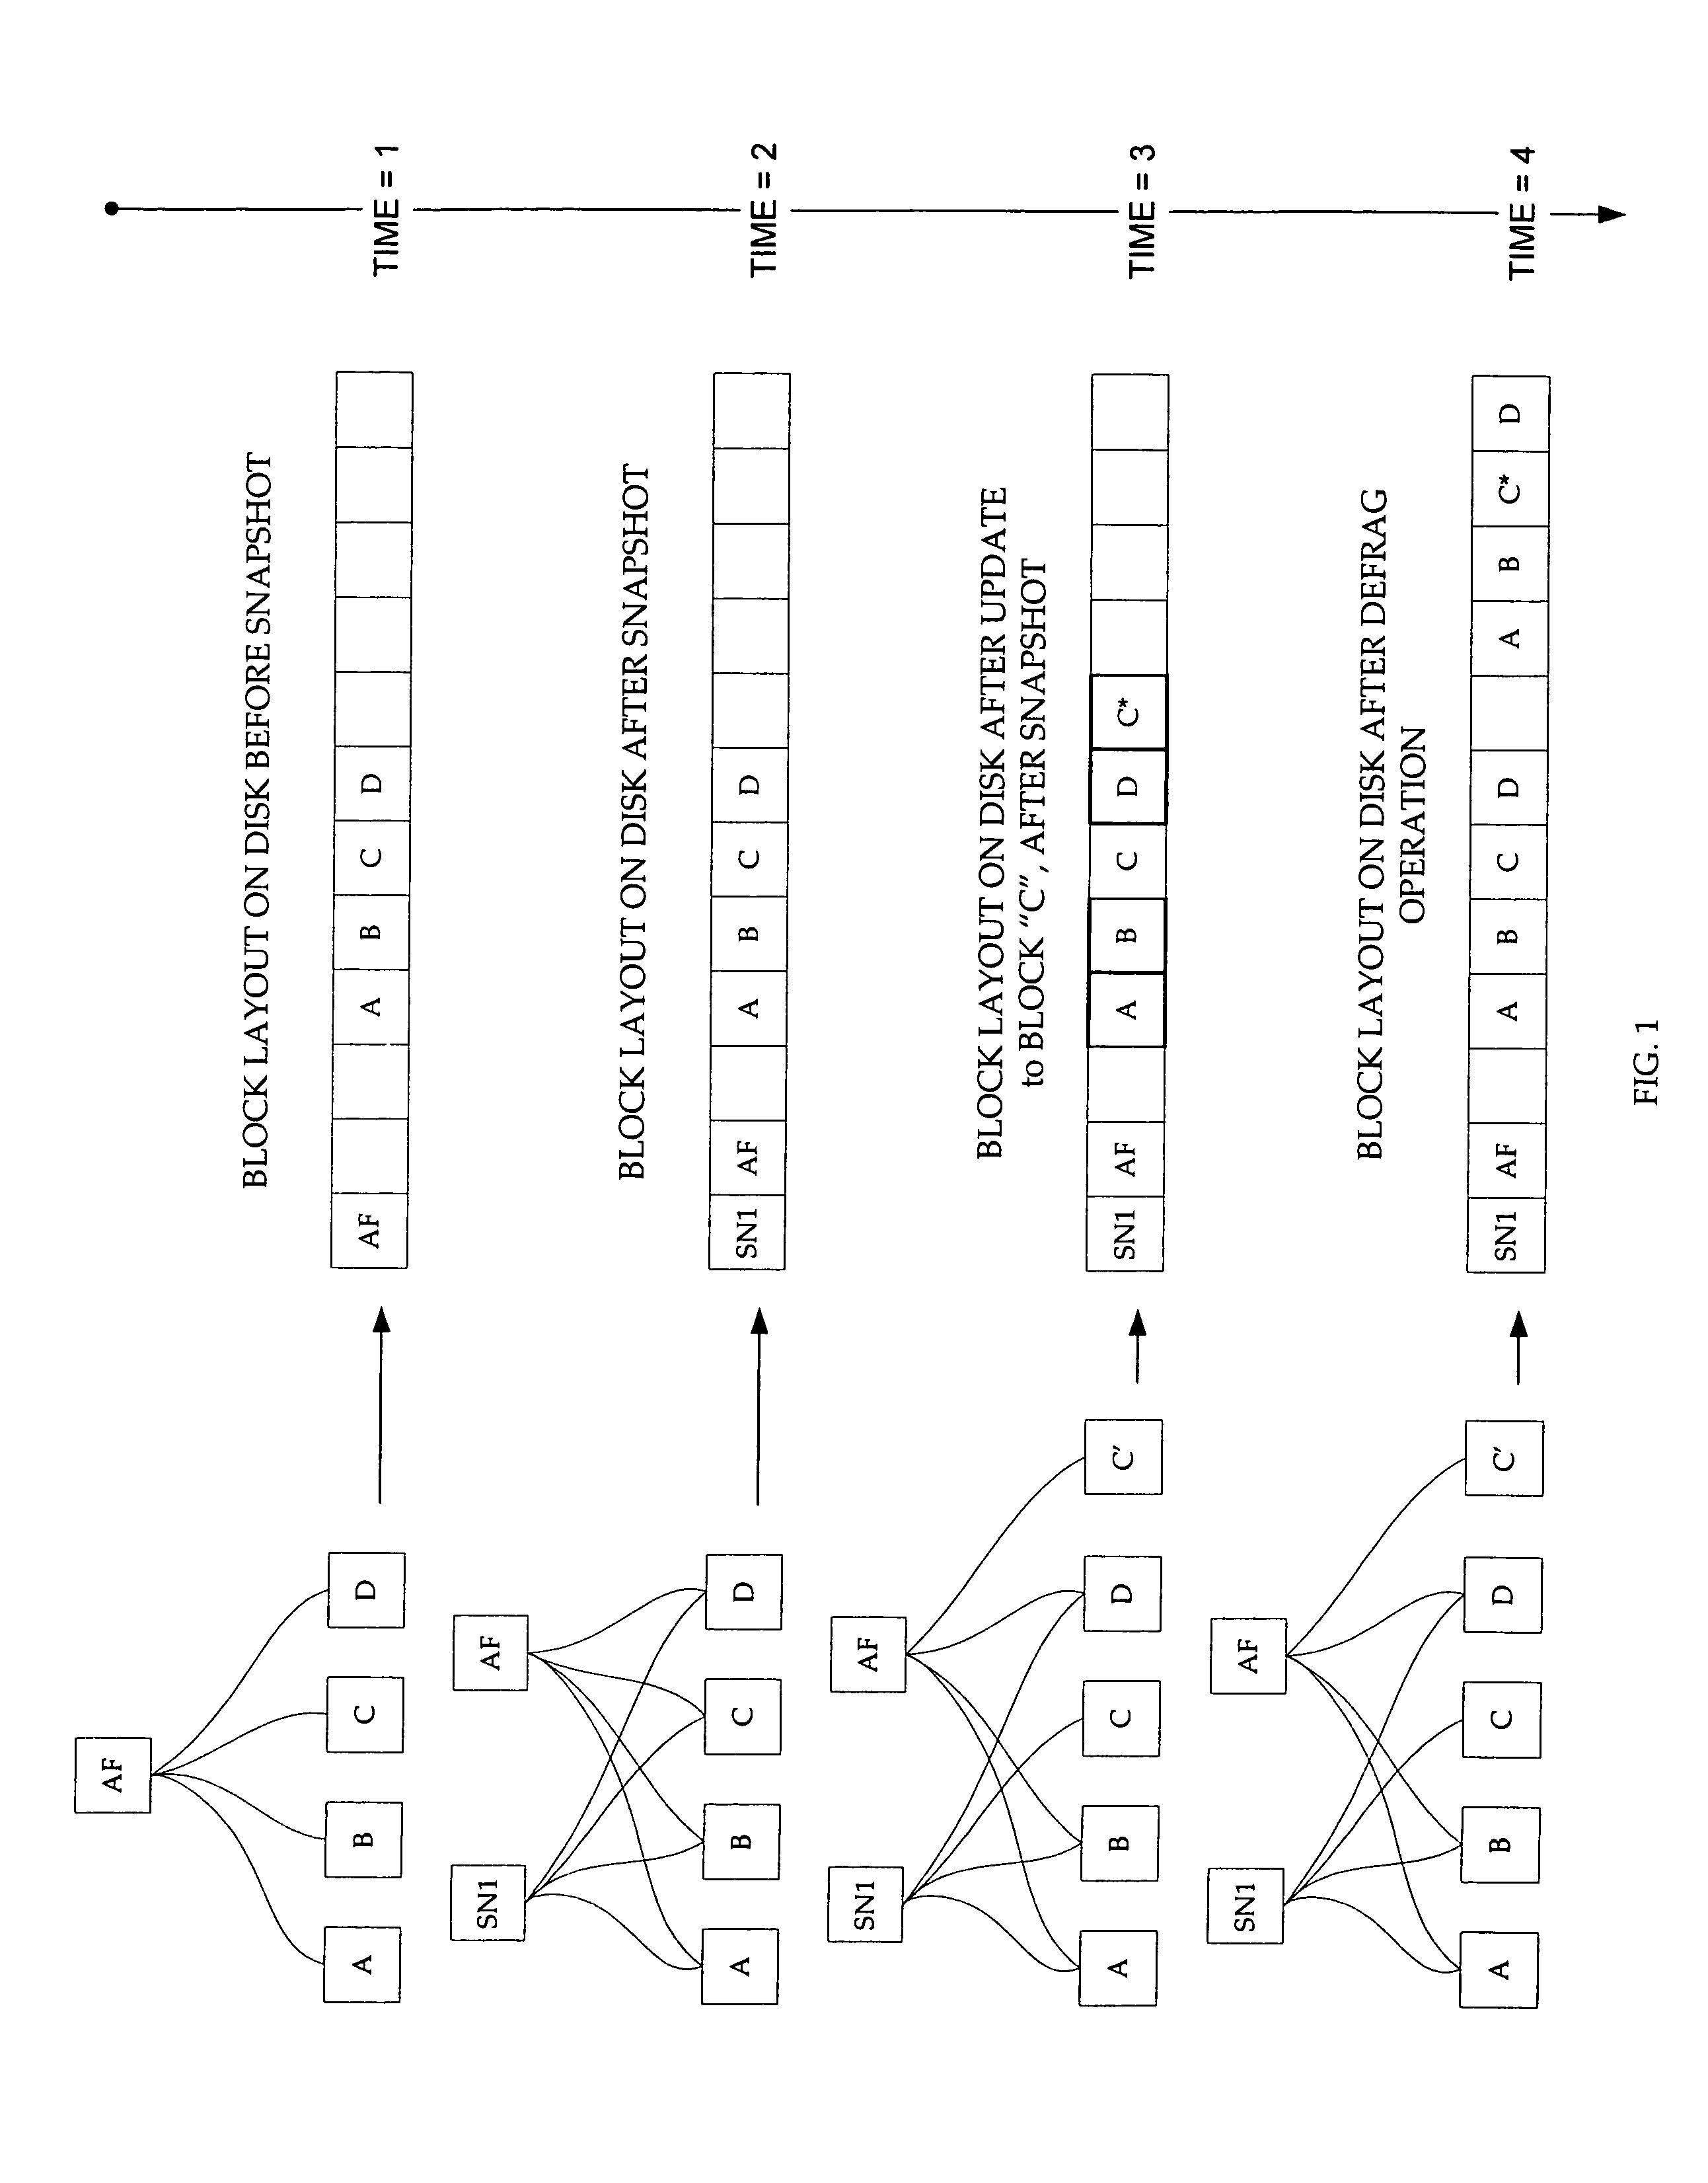 Method and system for reallocating data in a file system